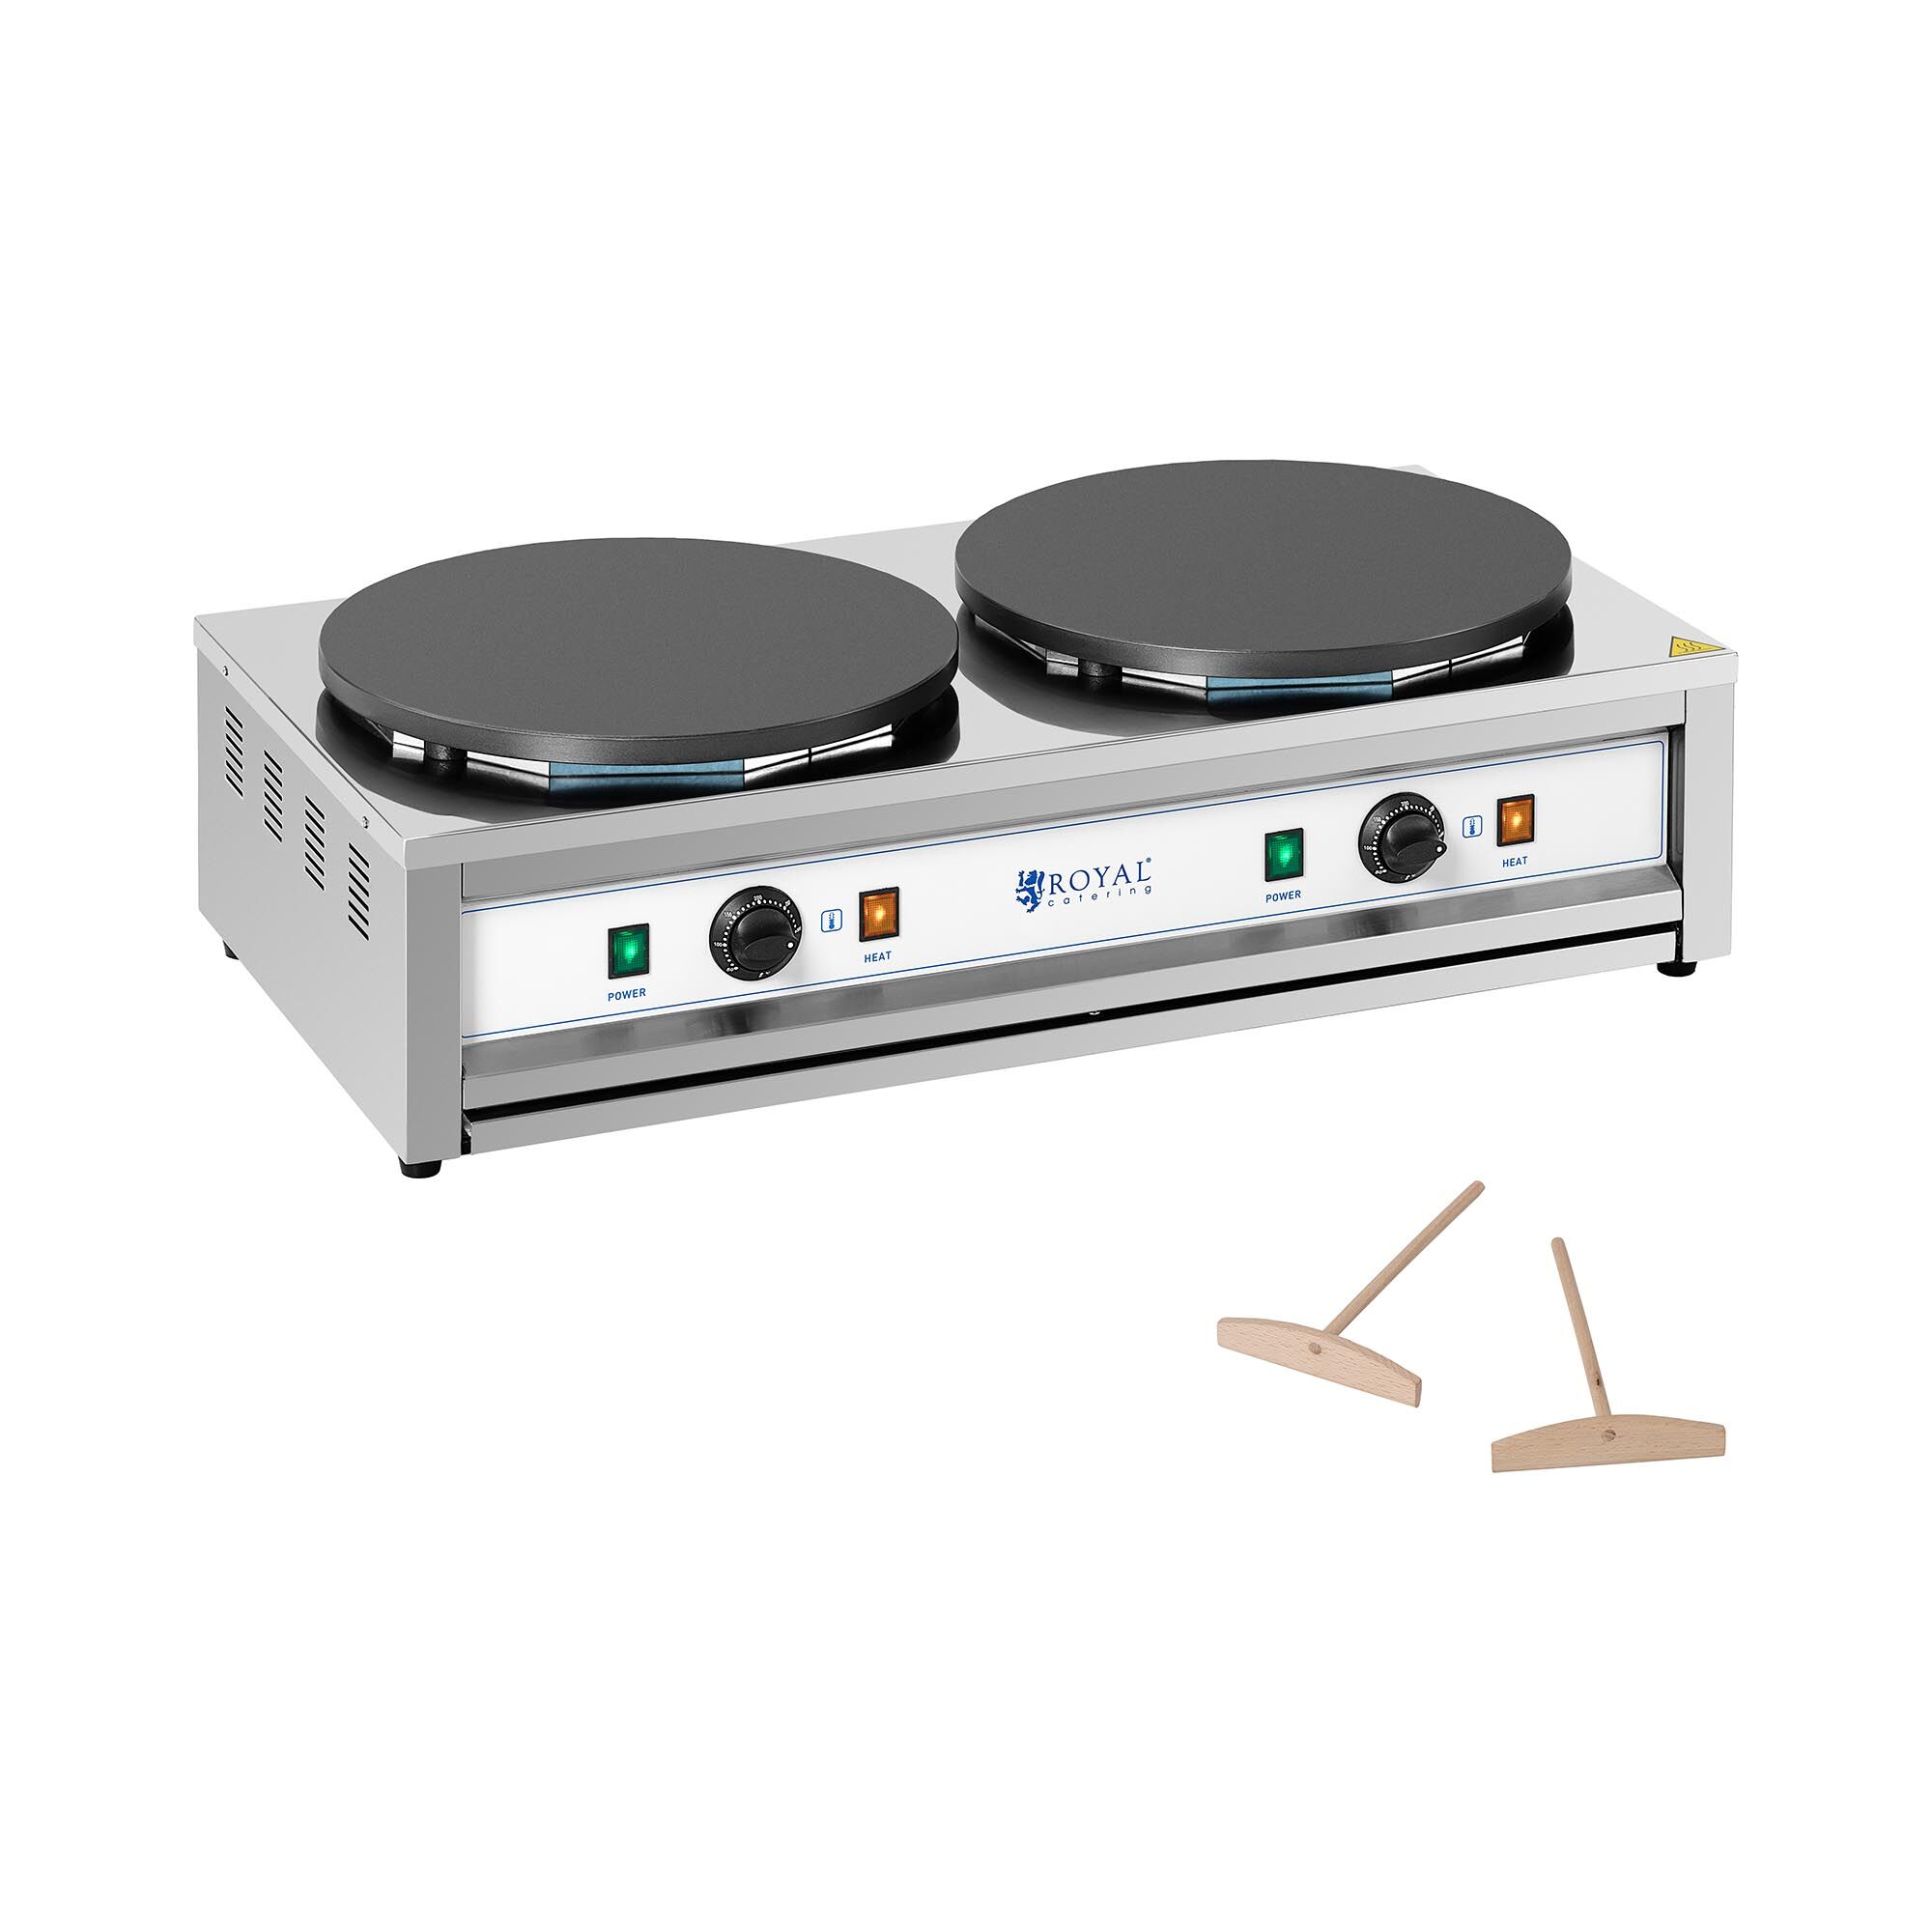 Royal Catering Crepe Maker - 2 heating plates - 2 x 400 mm - 2 x 3,000 W